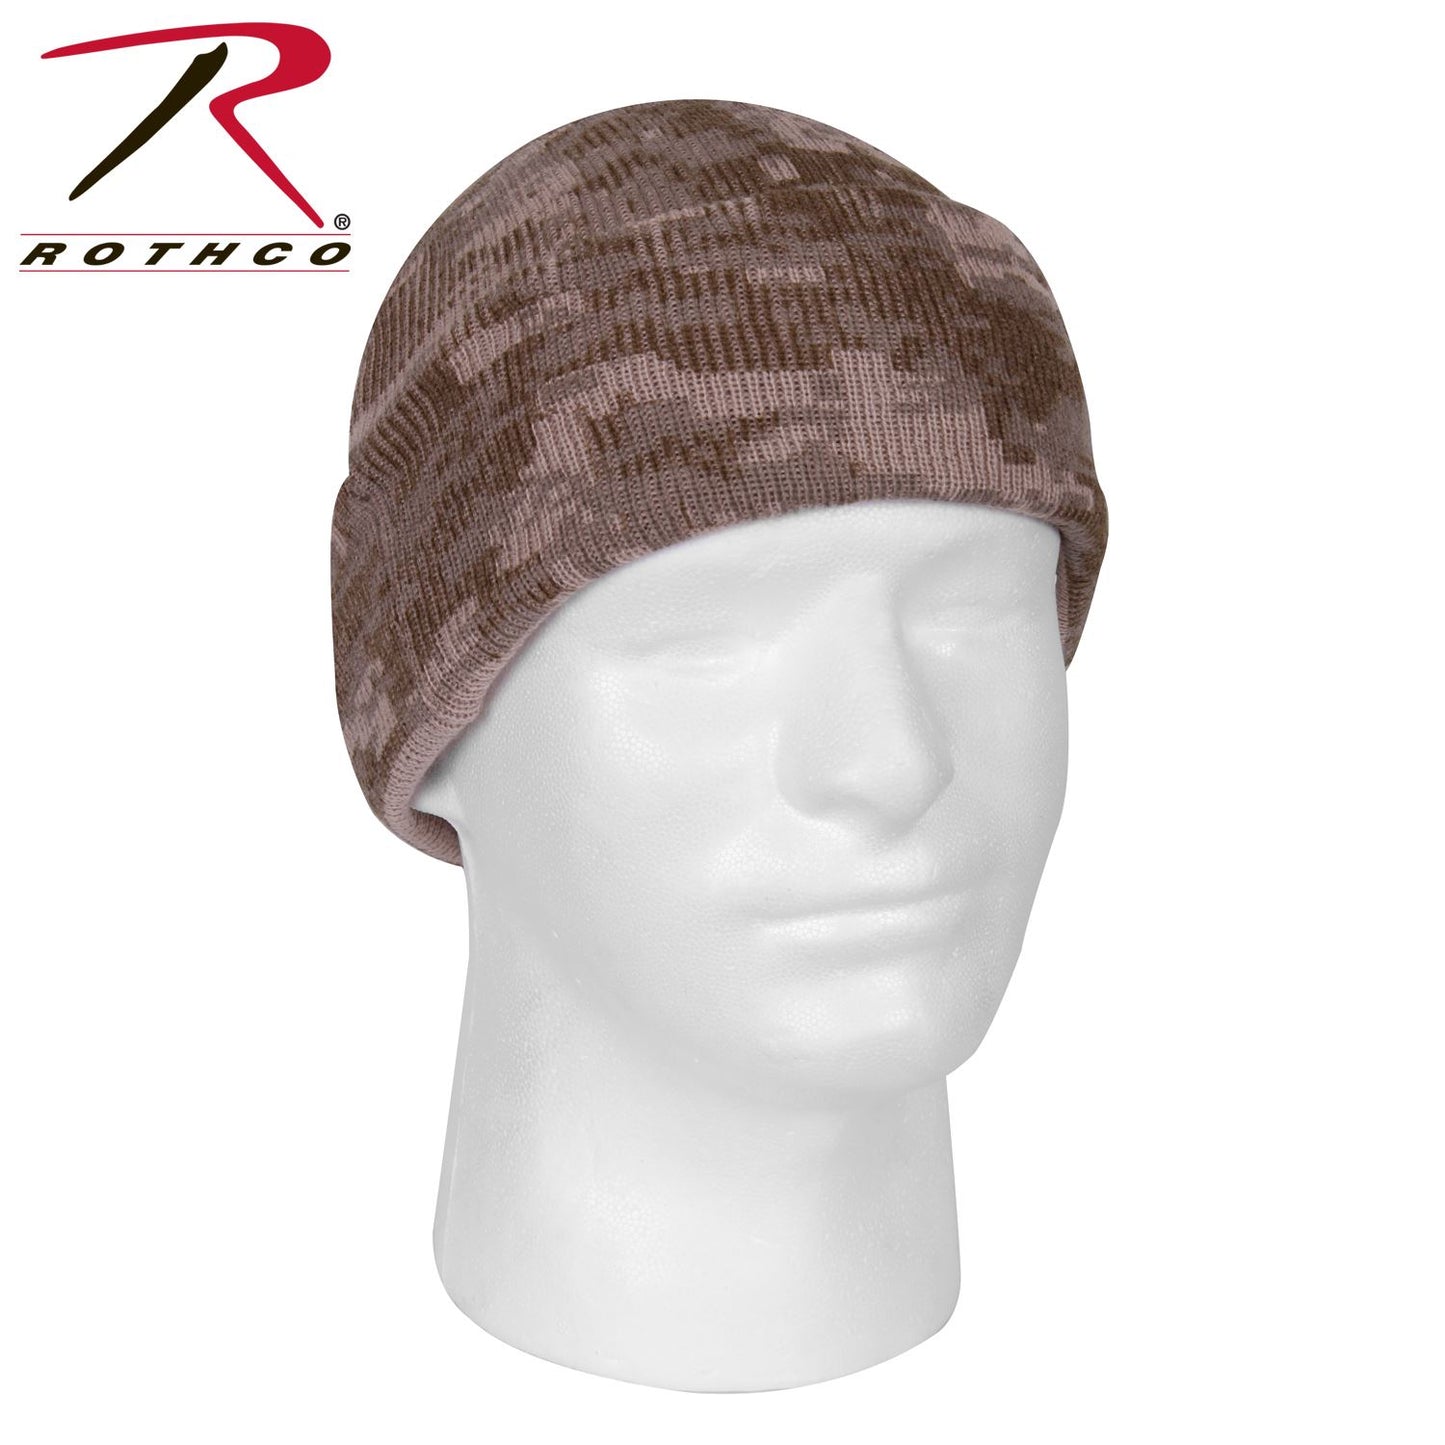 Rothco Deluxe Watch Cap